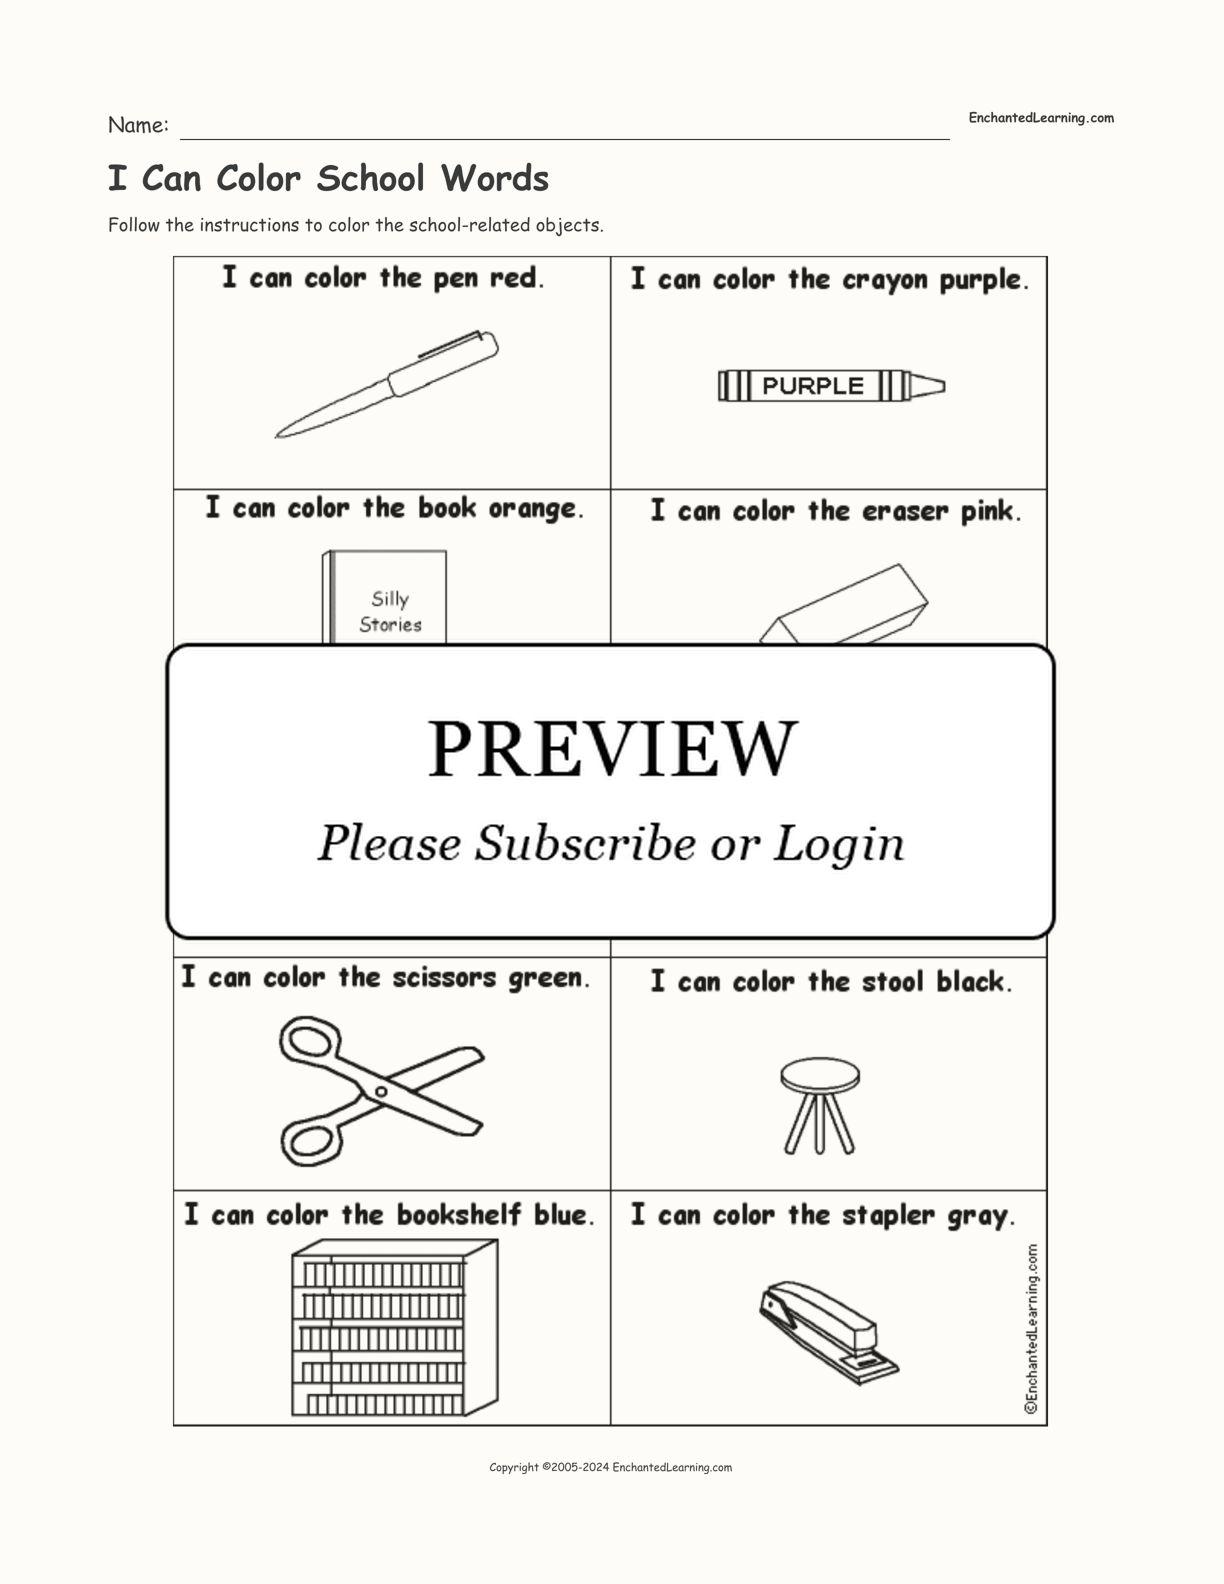 I Can Color School Words interactive worksheet page 1